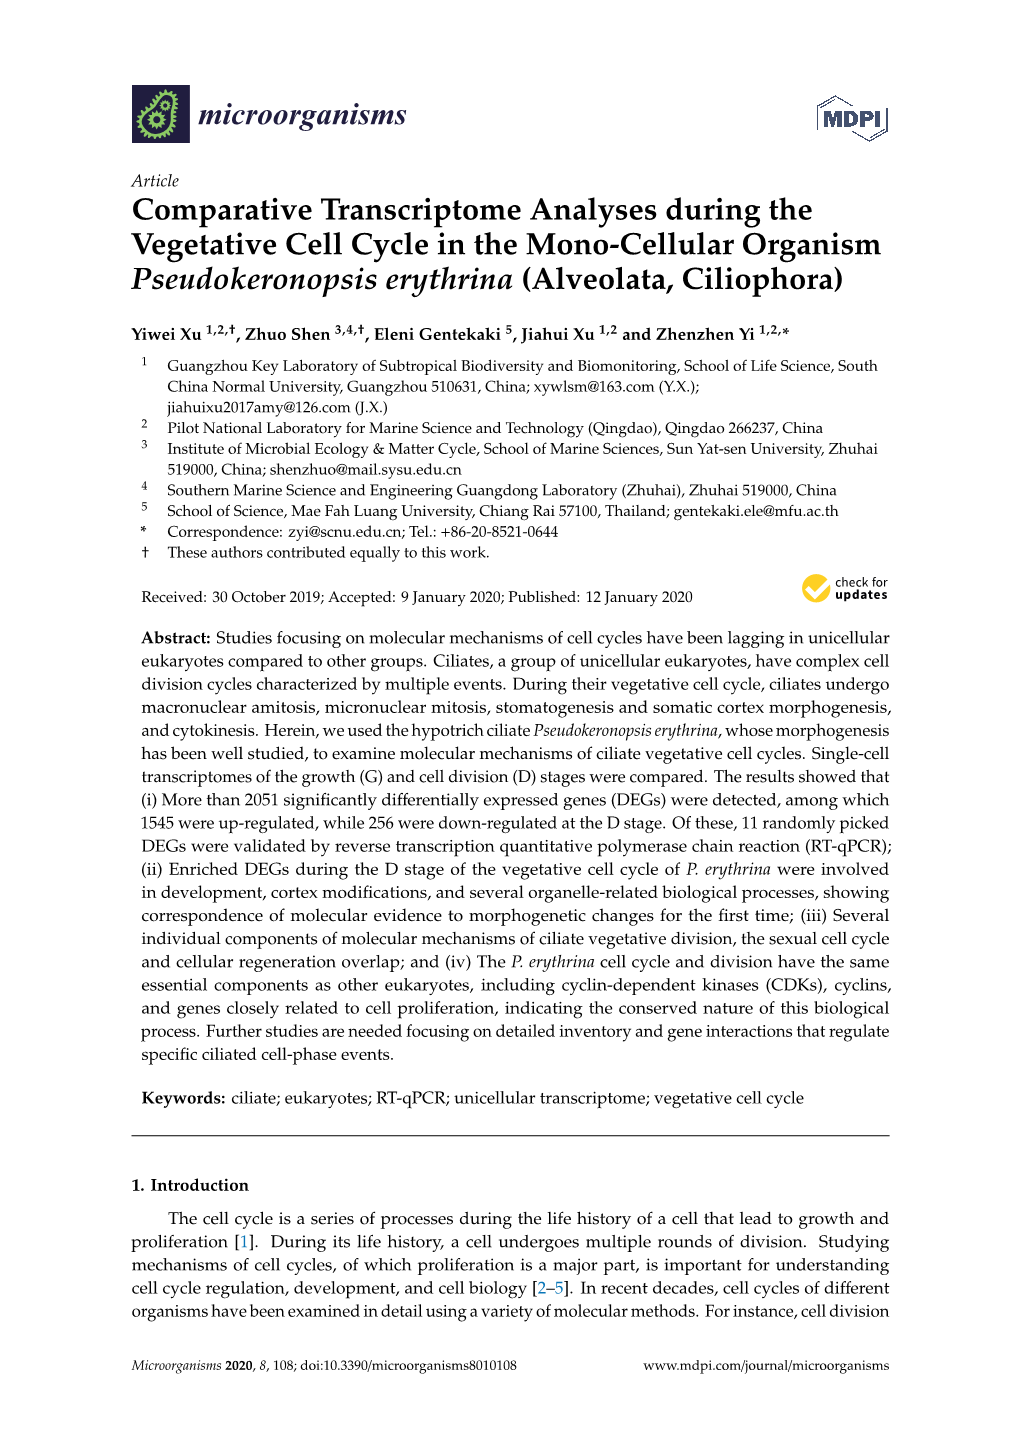 Comparative Transcriptome Analyses During the Vegetative Cell Cycle in the Mono-Cellular Organism Pseudokeronopsis Erythrina (Alveolata, Ciliophora)